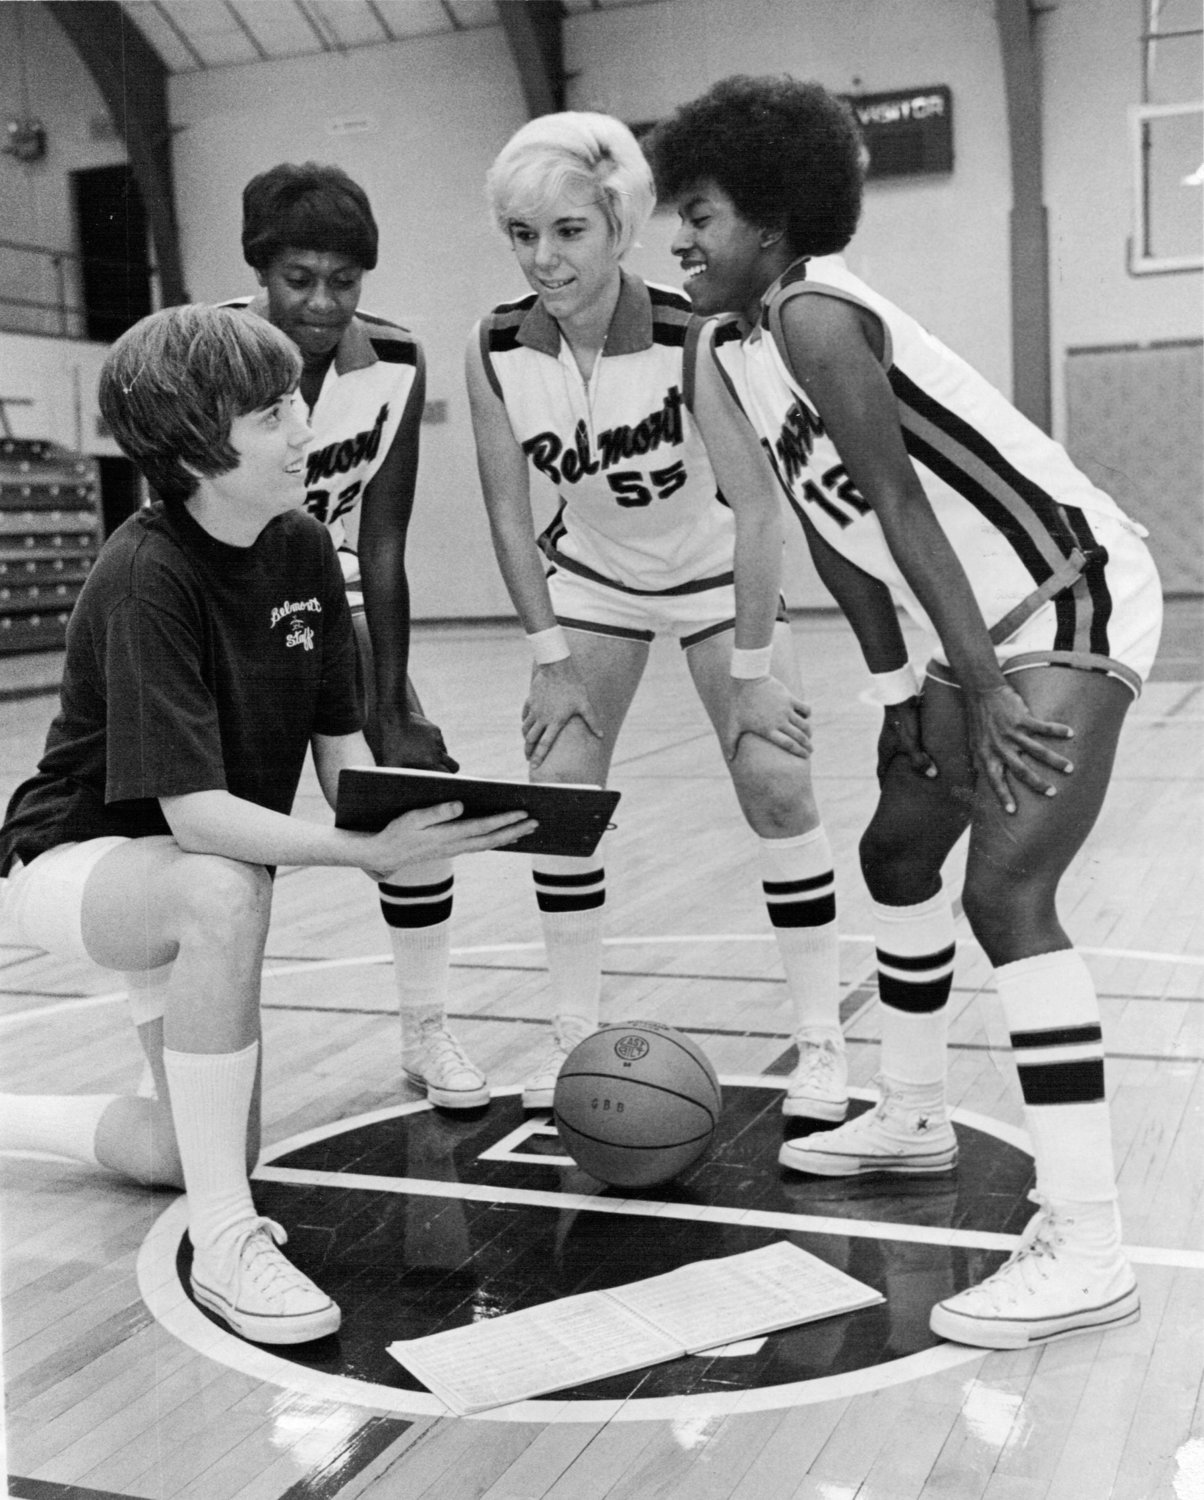 Betty Wiseman founded Belmont University’s women’s basketball team in 1968, opening up the door for women’s athletics at the school and beyond. (Photo courtesy Belmont Athletics)